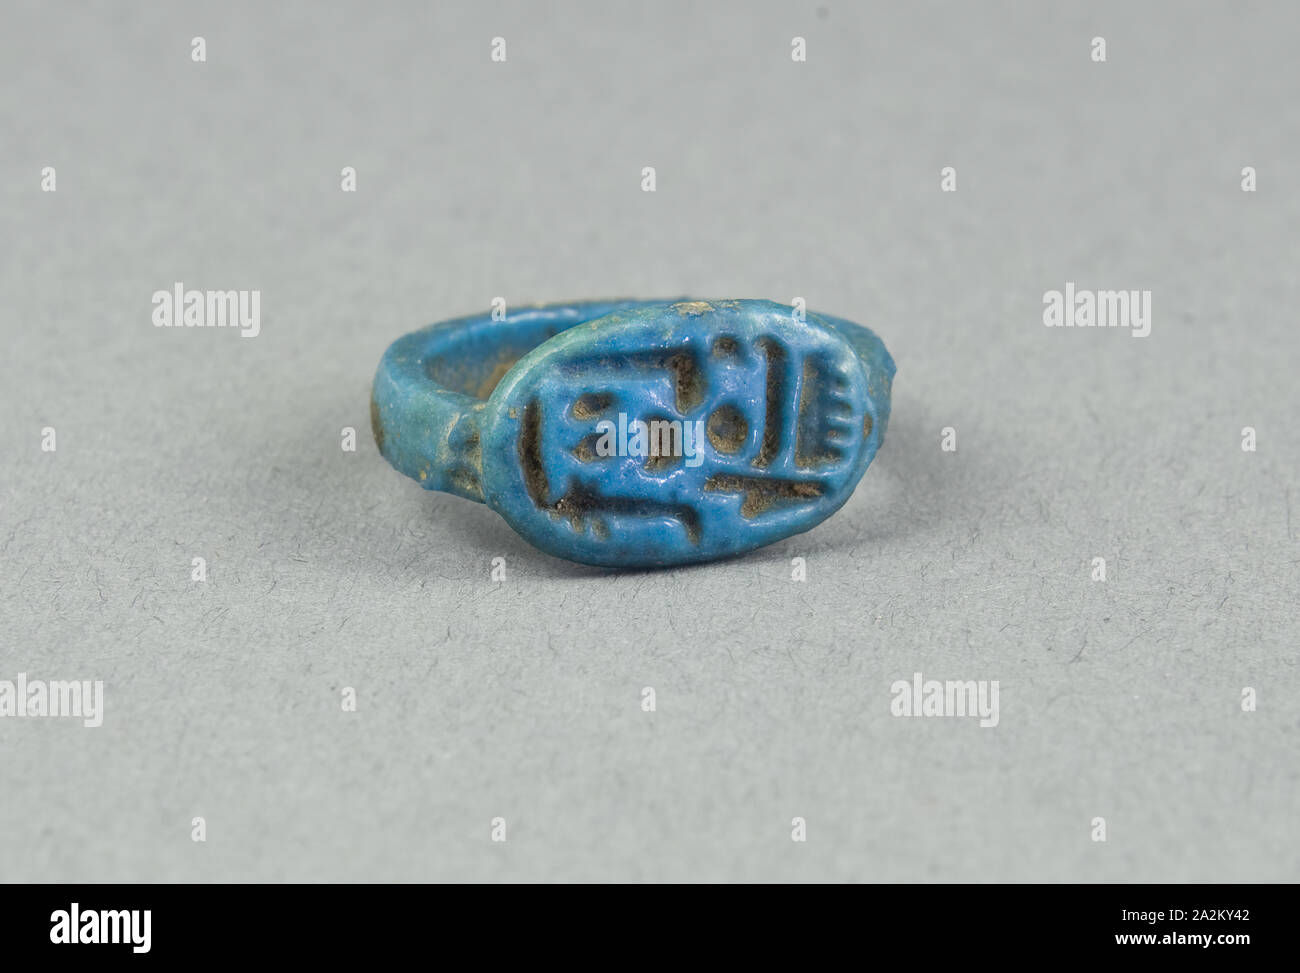 Ring: Amun-Ra, King of the Gods, the Lord, New Kingdom, Dynasties 18–20 (about 1550–1069 BC), Egyptian, Egypt, Faience, W. 1 cm (3/8 in.), diam. 2.1 cm (13/16 in Stock Photo